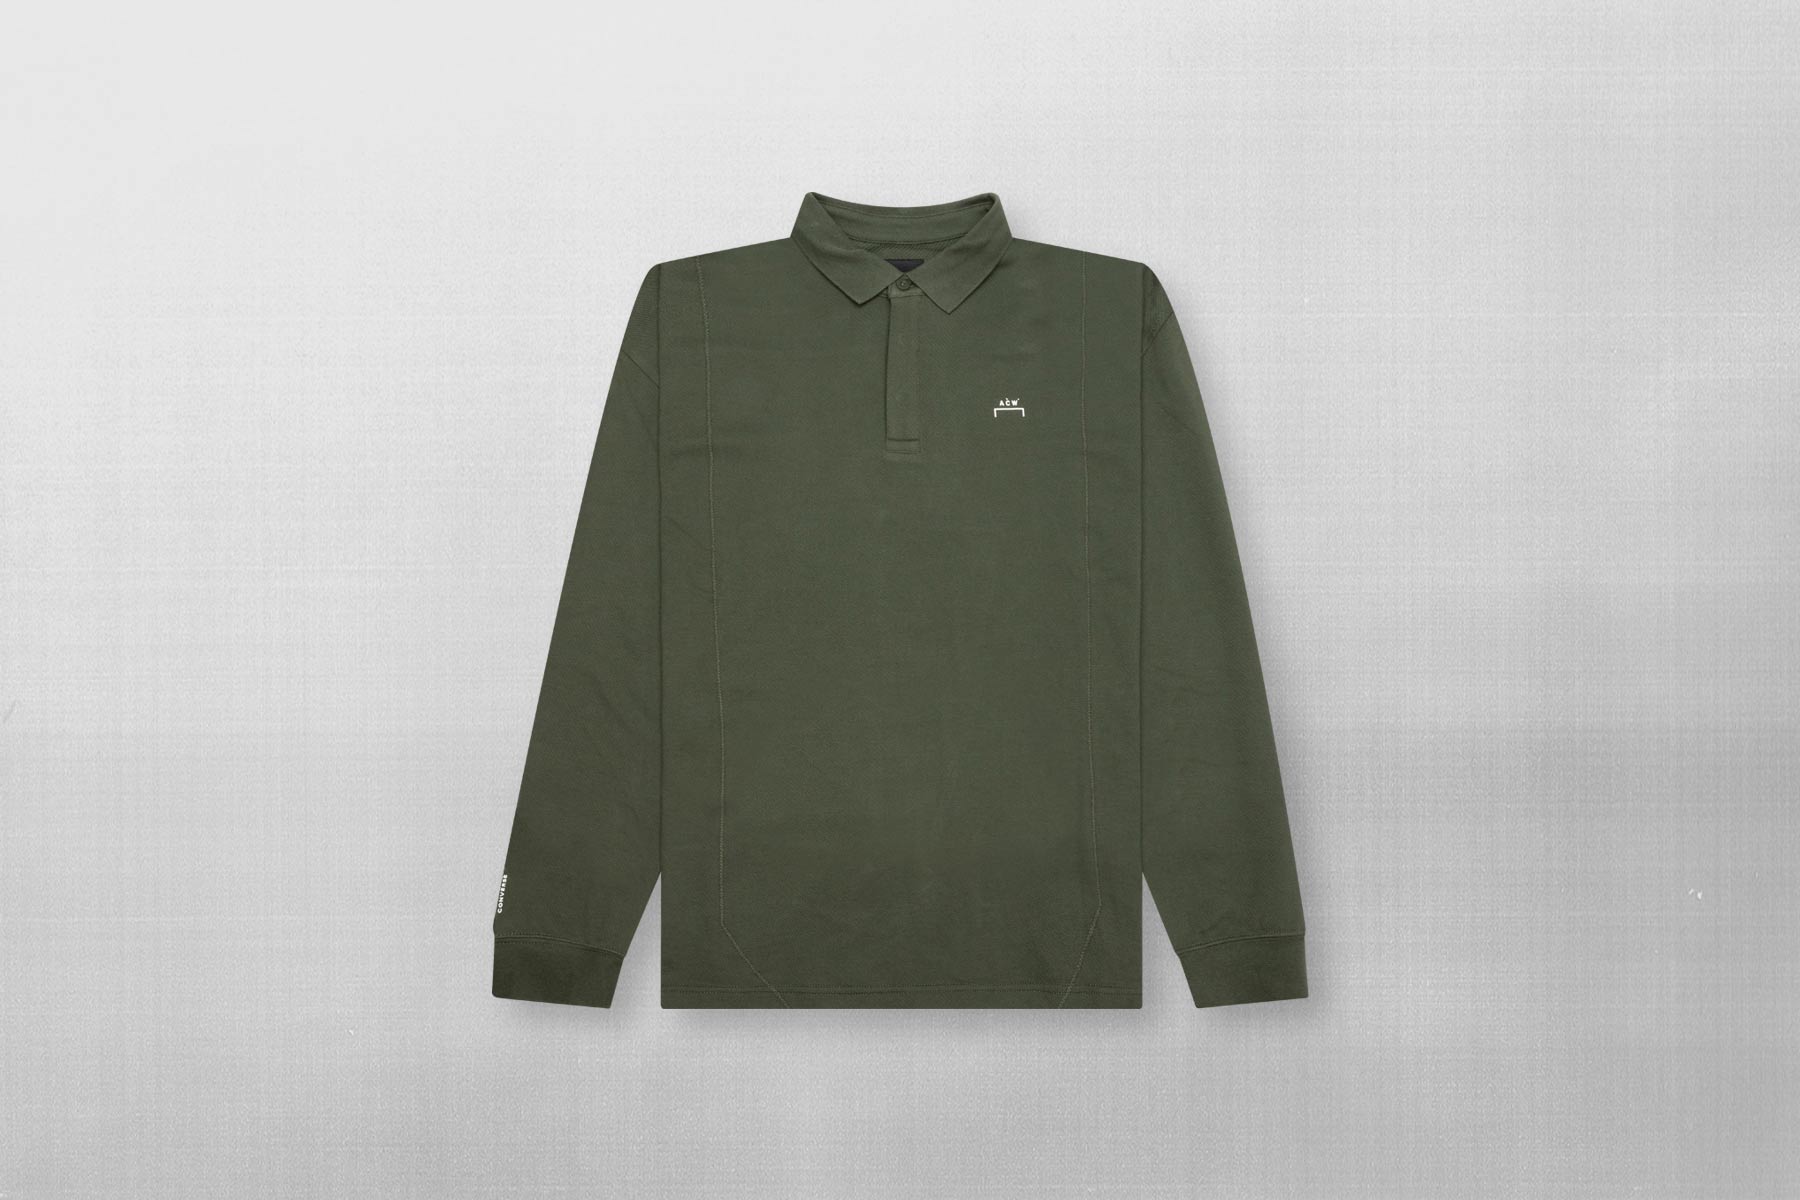 Converse x A-Cold-Wall Polo - Dark Pine Green, , large image number null